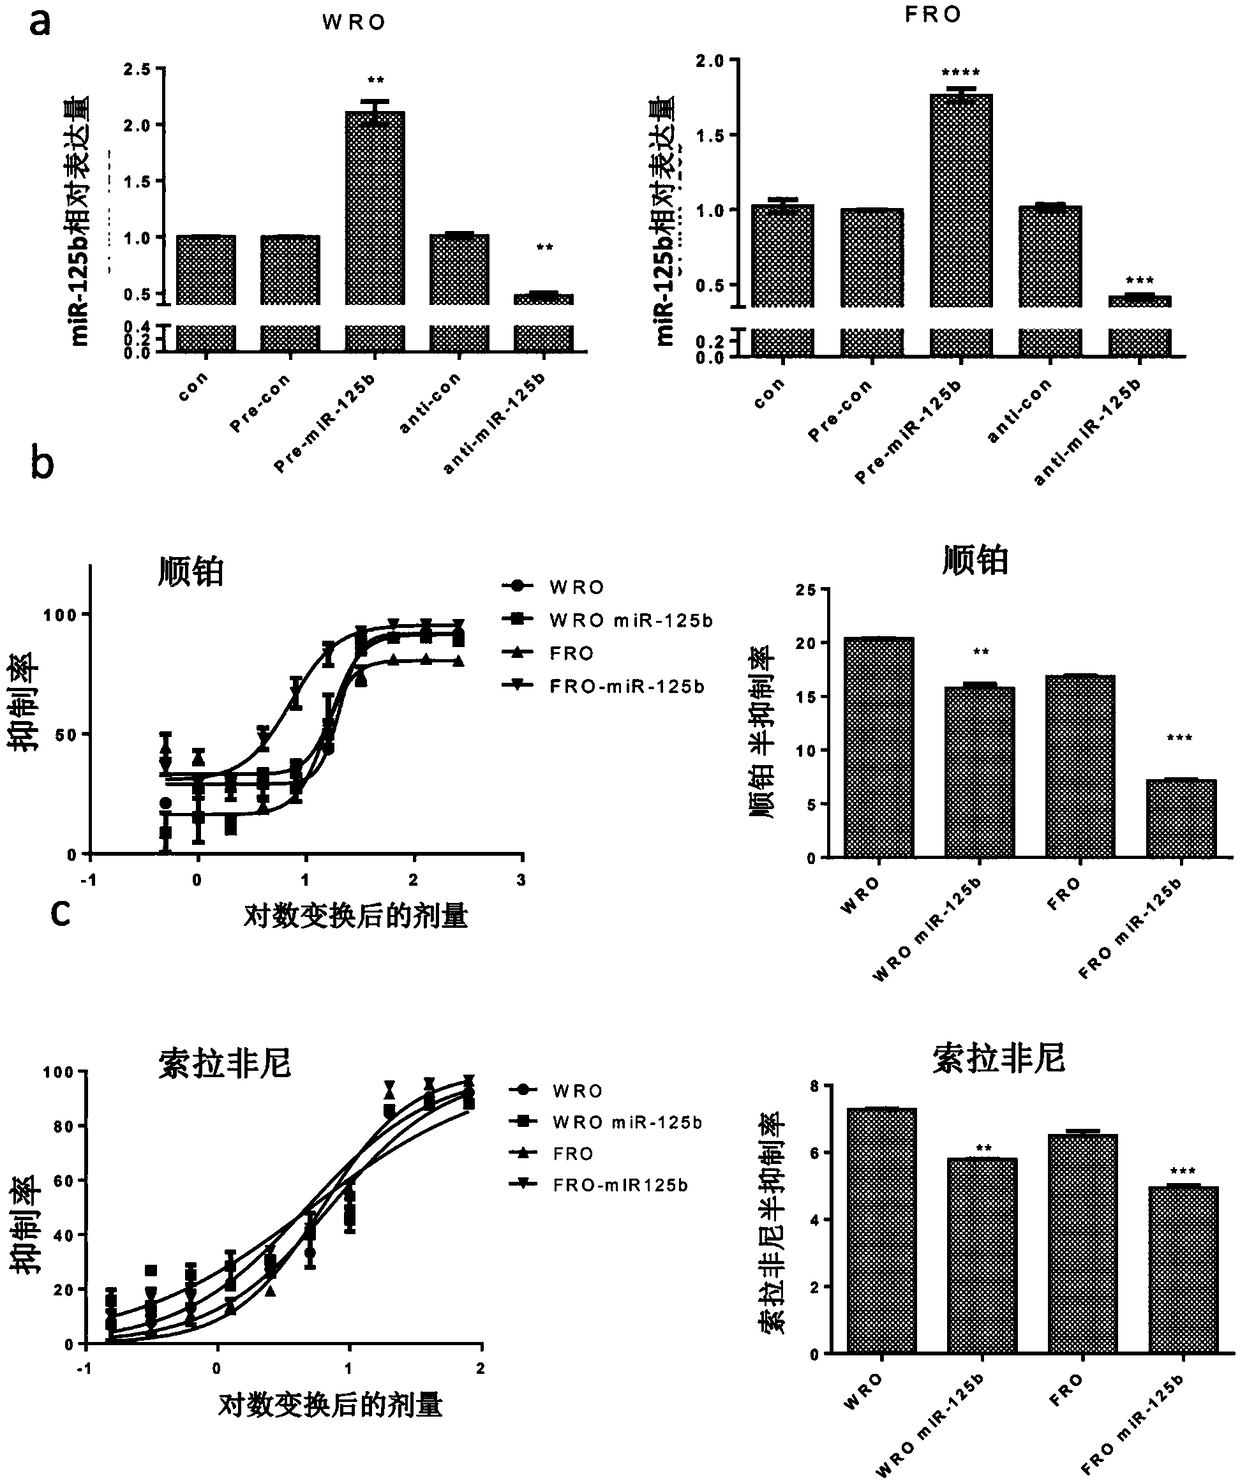 Application of miR-125b and chemotherapeutic agent in preparation of drug for treating thyroid cancer